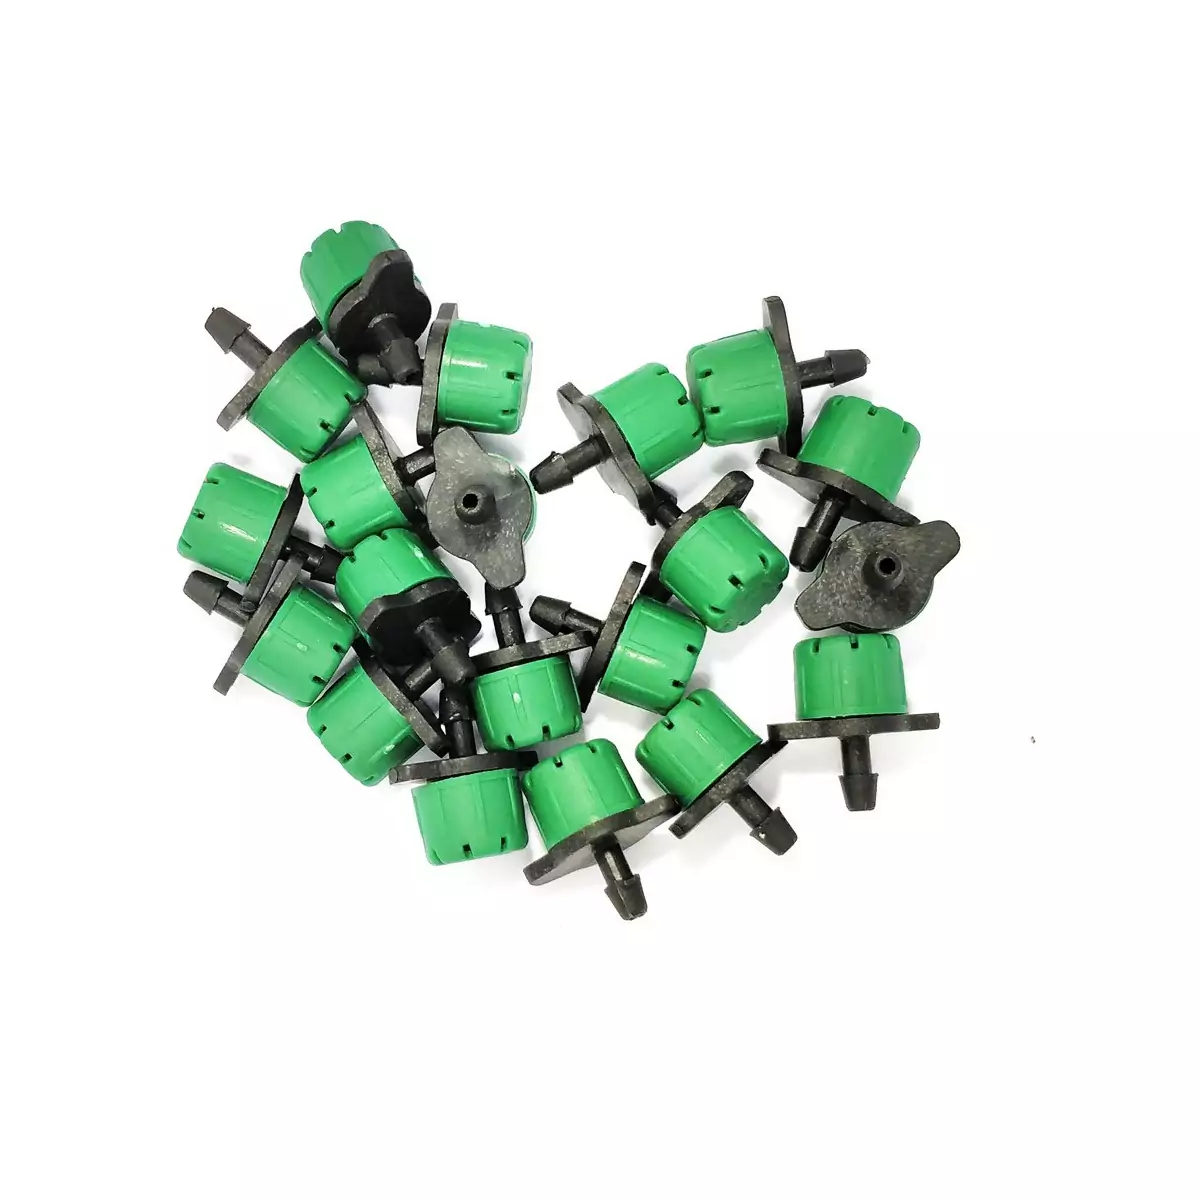 Set of 20 green color drippers